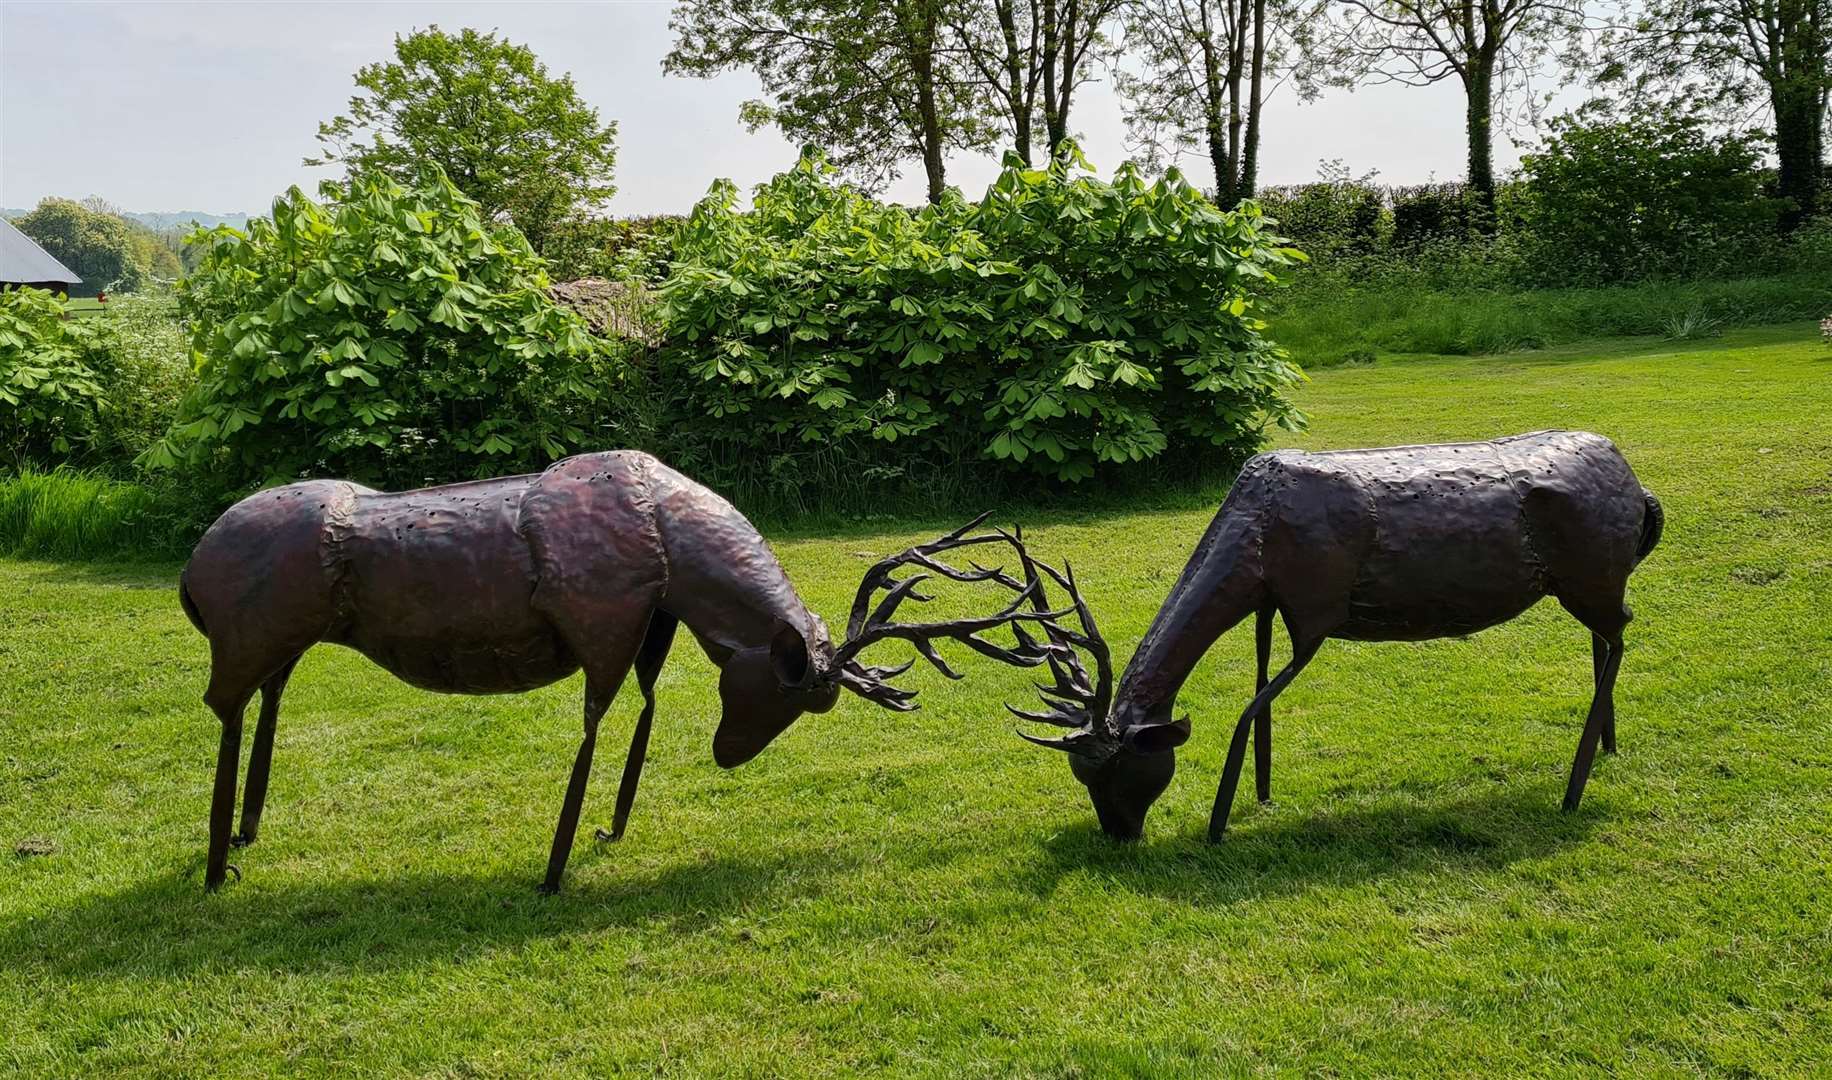 The Rutting Stags sculpture by Emily Stone will be featured at the Sculpture in the Garden event. Picture: Godinton House